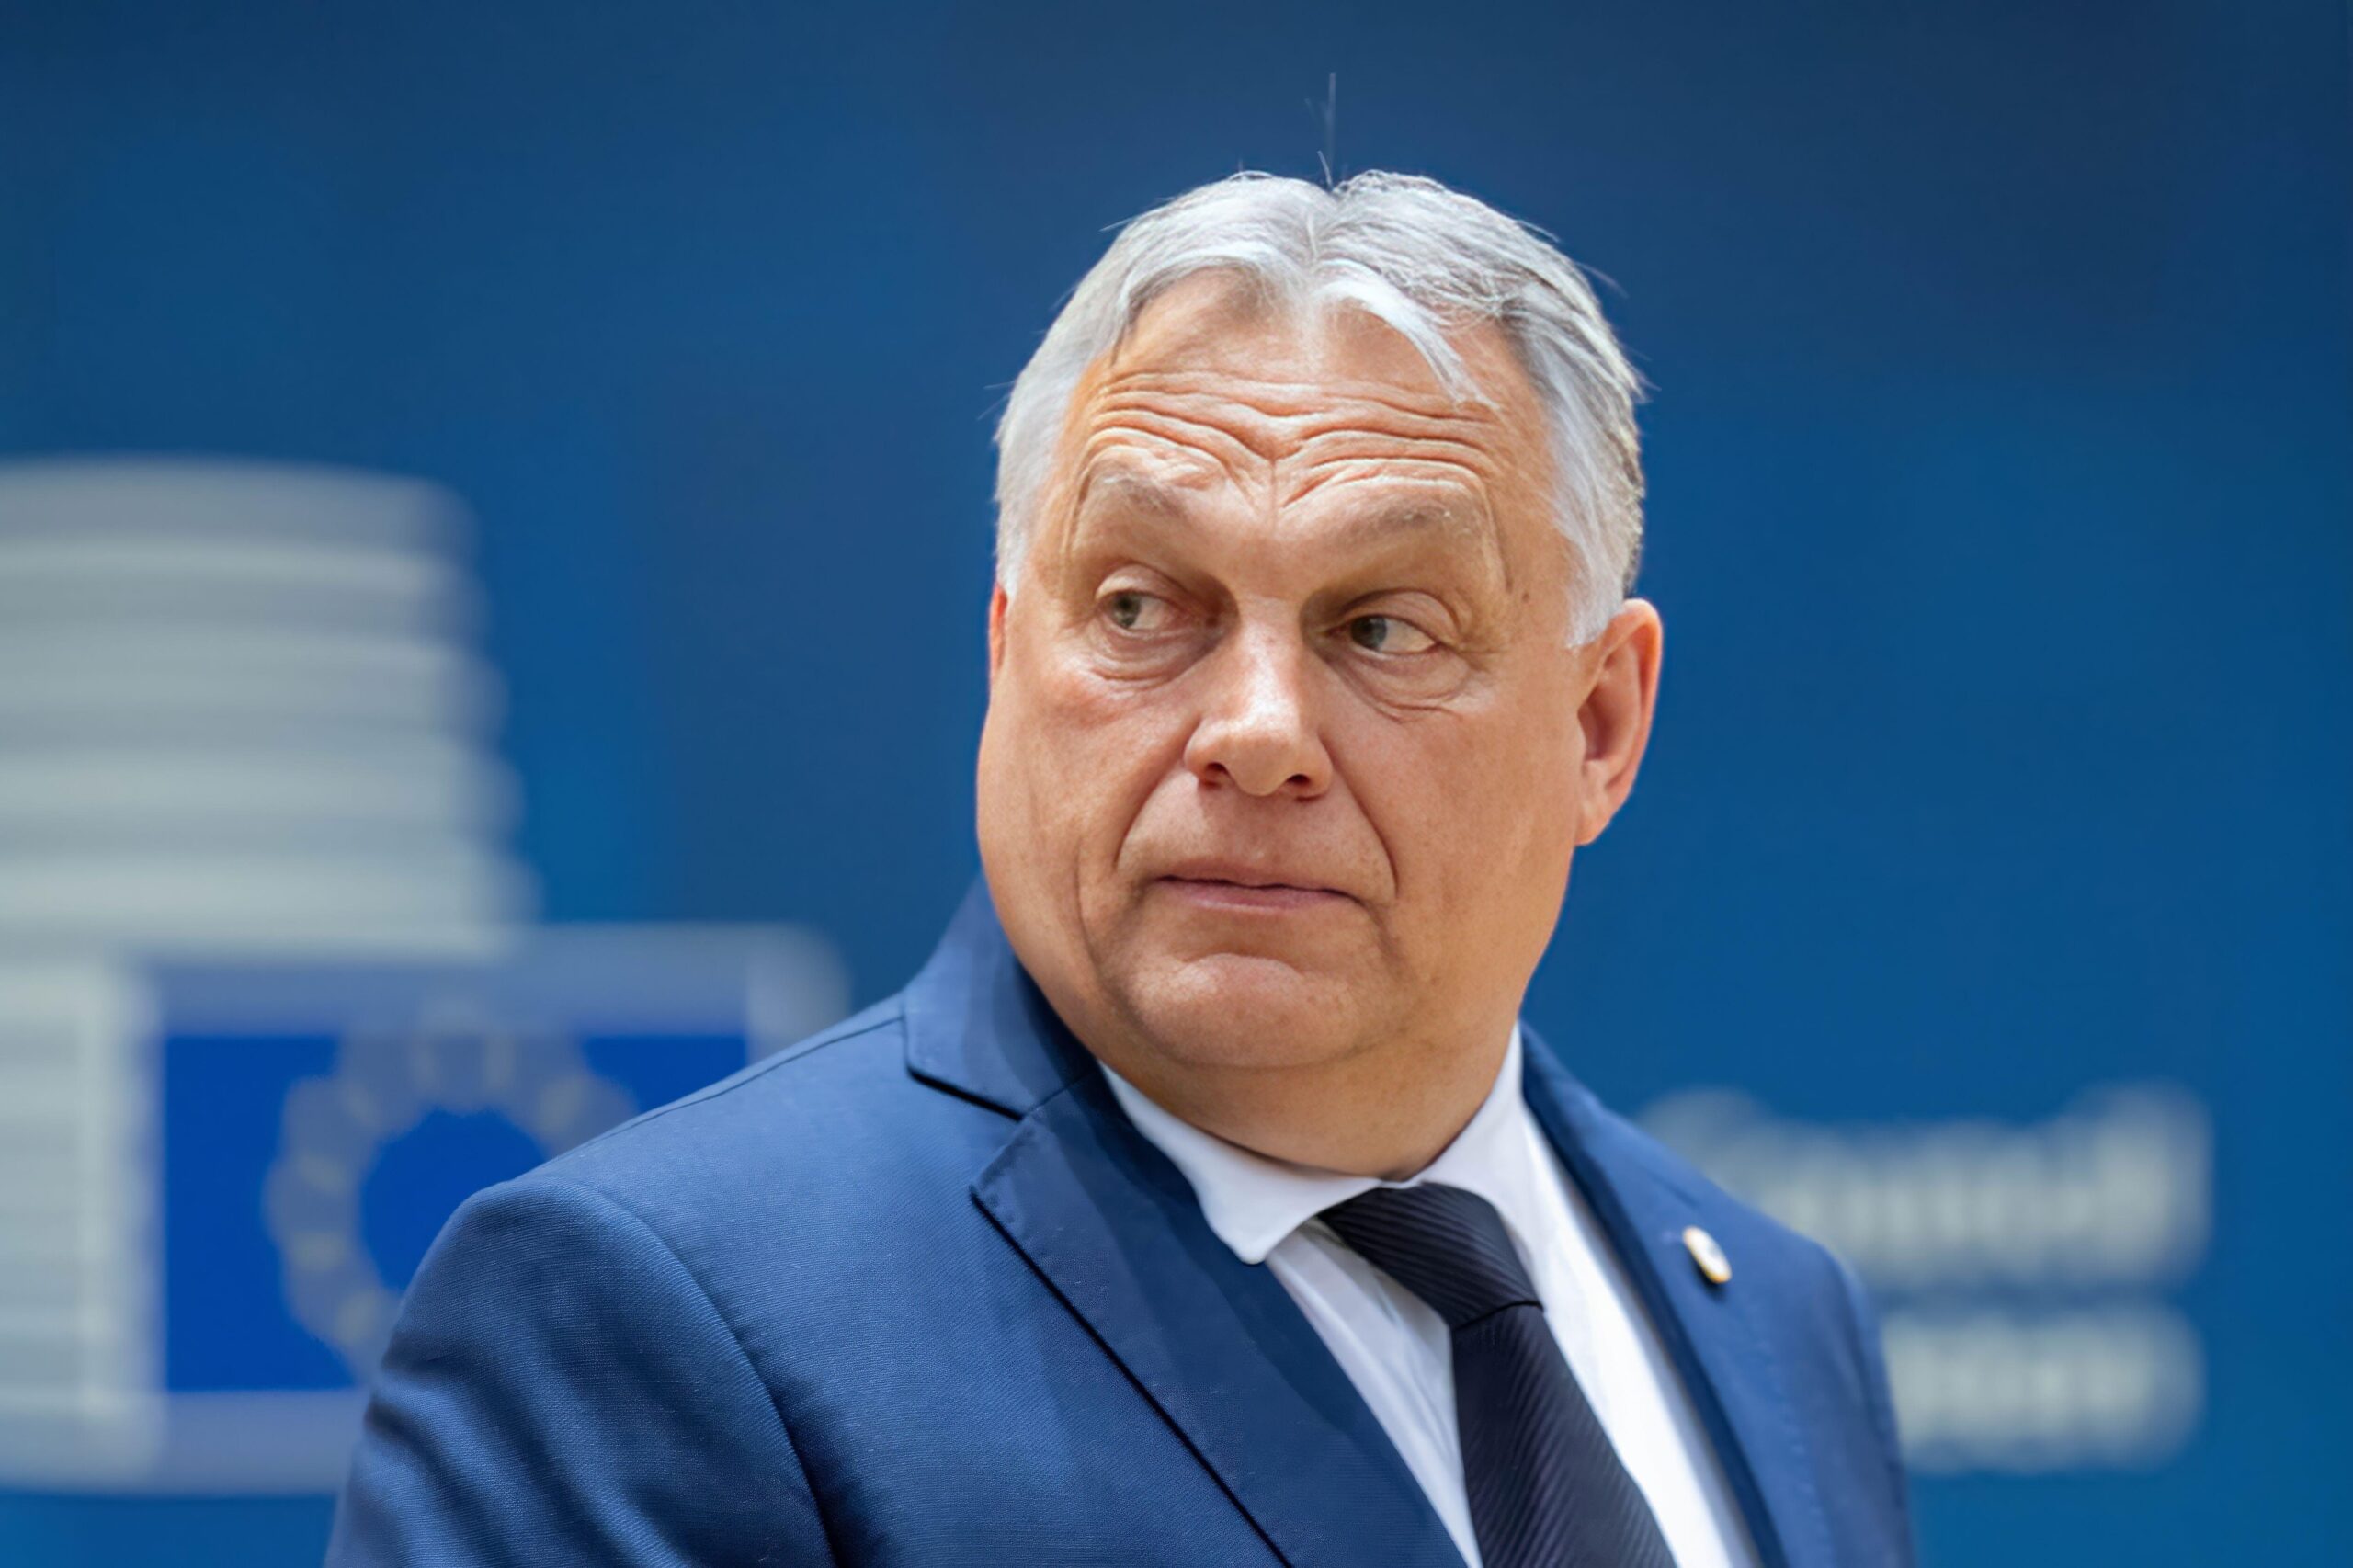 Orbán-backed Think Tank Courts Farmers Linked to Far Right Ahead of EU Poll